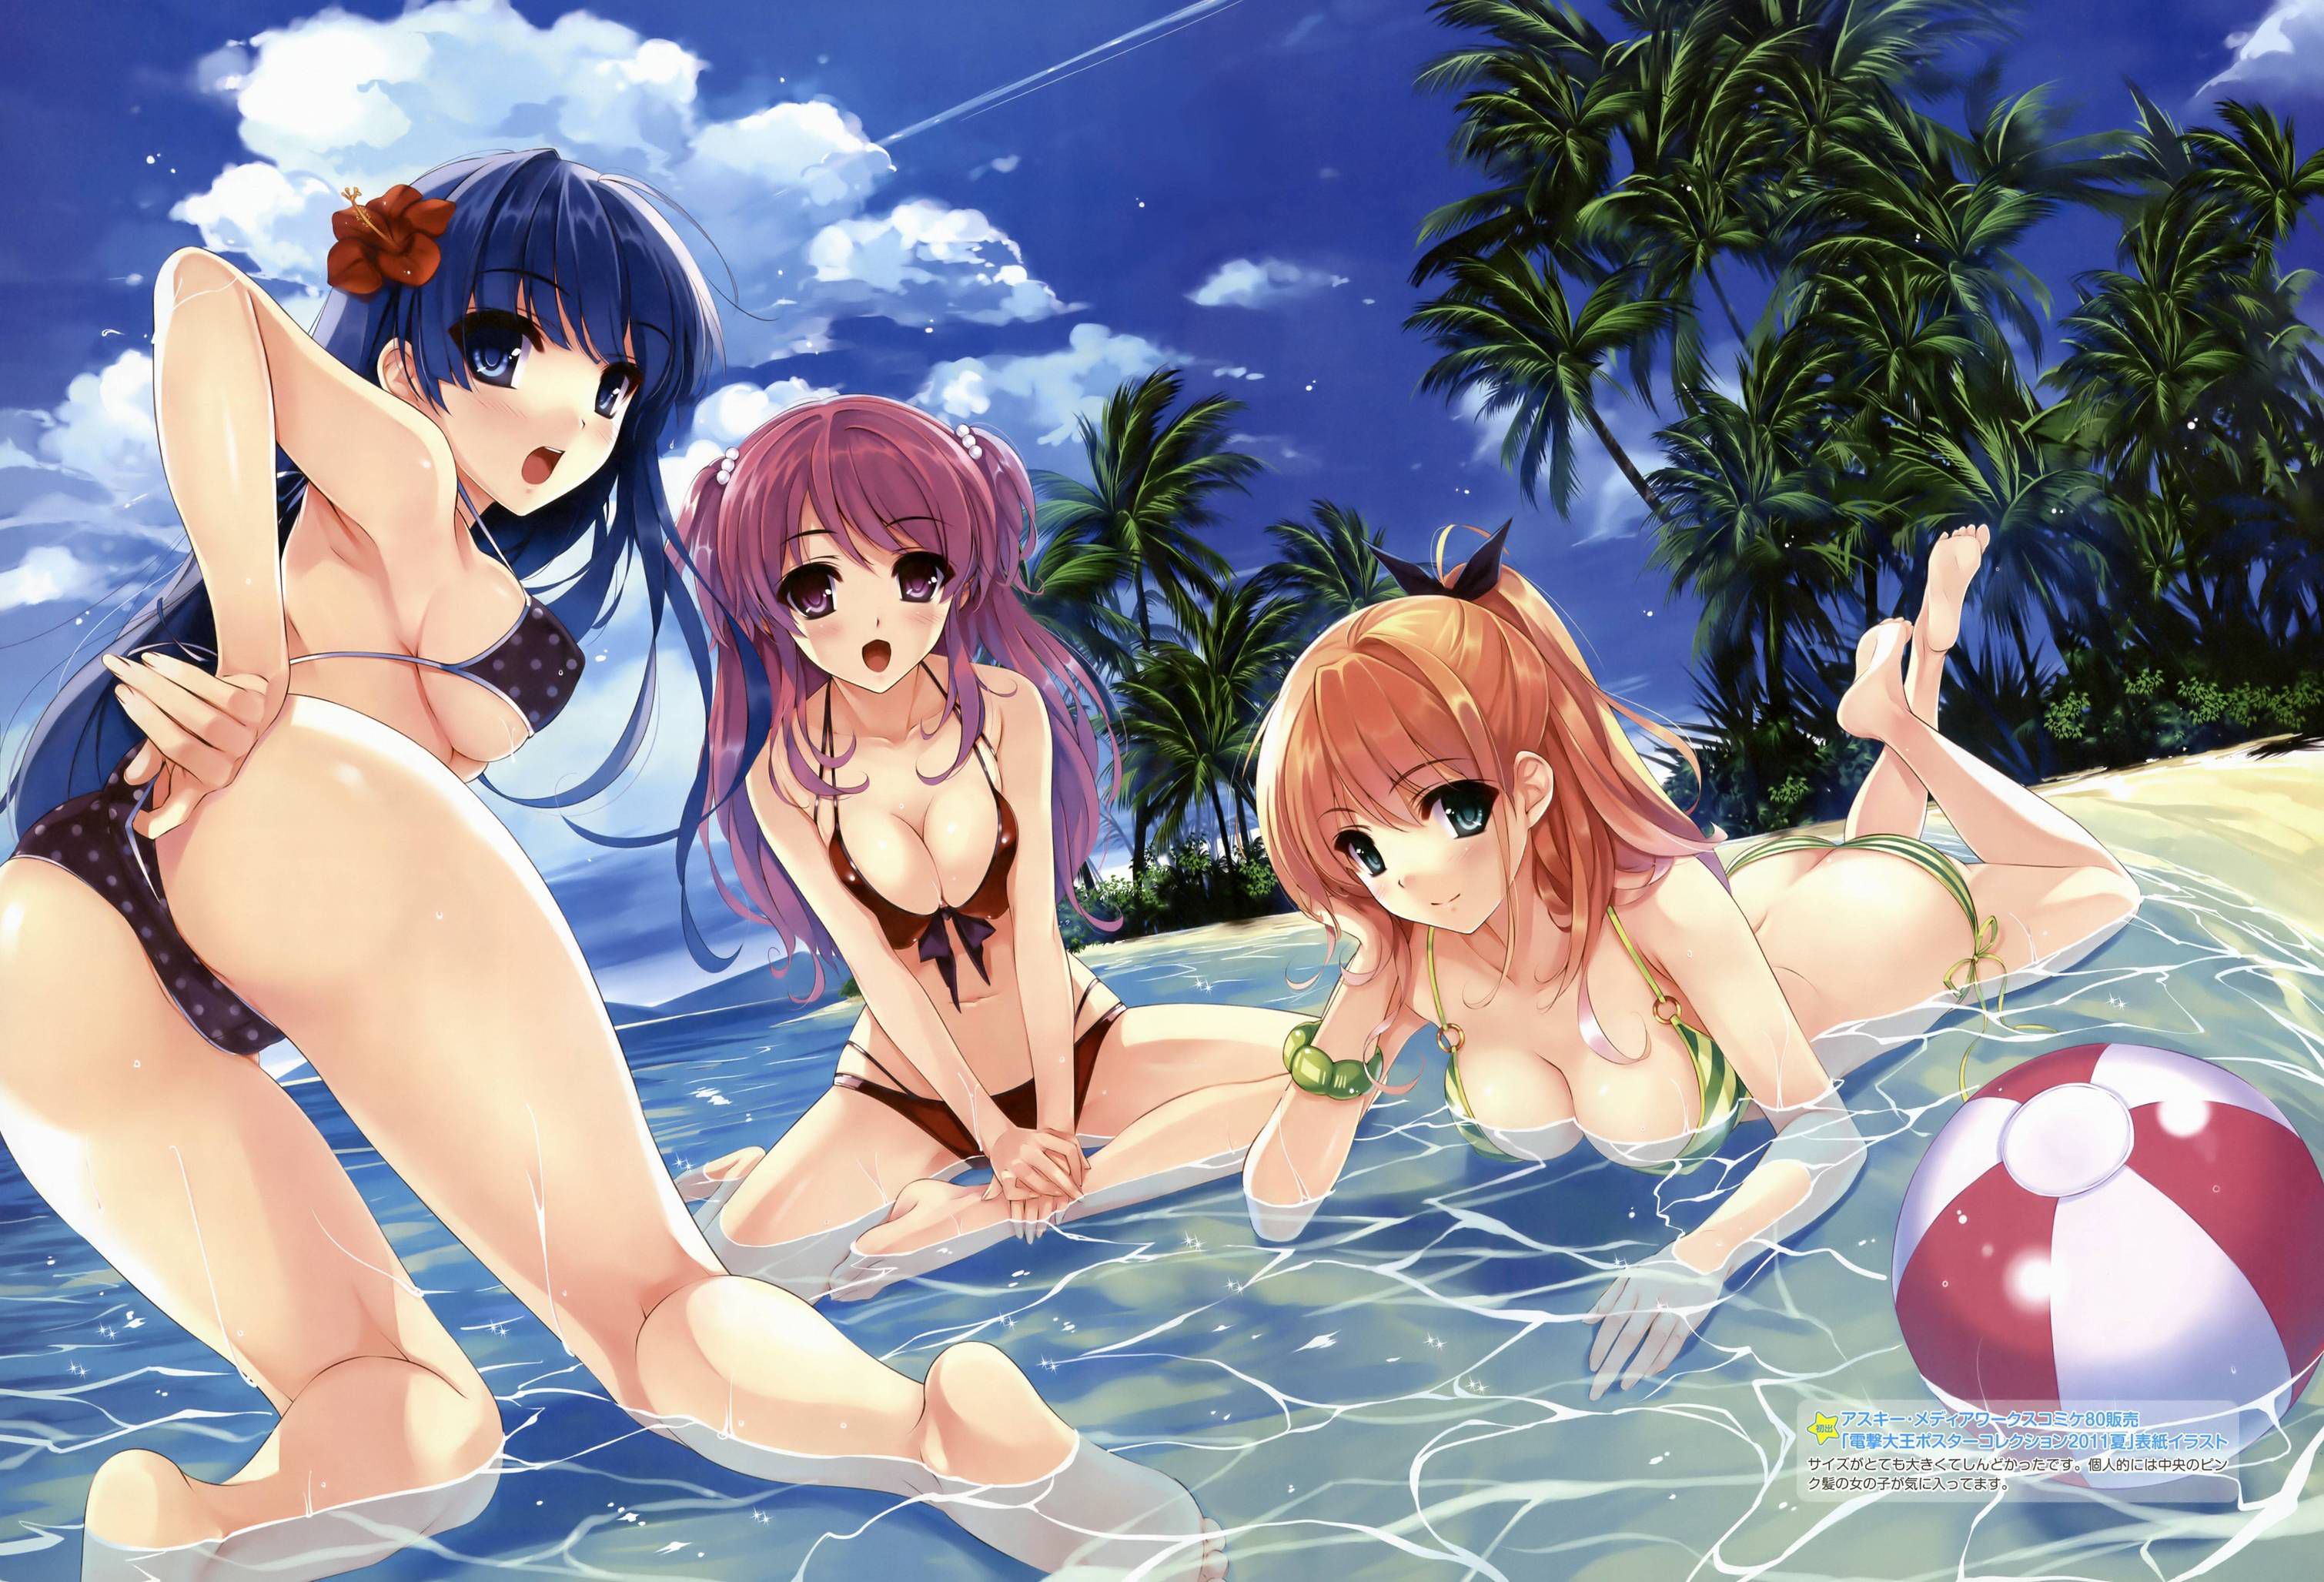 Refreshes the skin component for girl bikini pictures. Vol.10 1